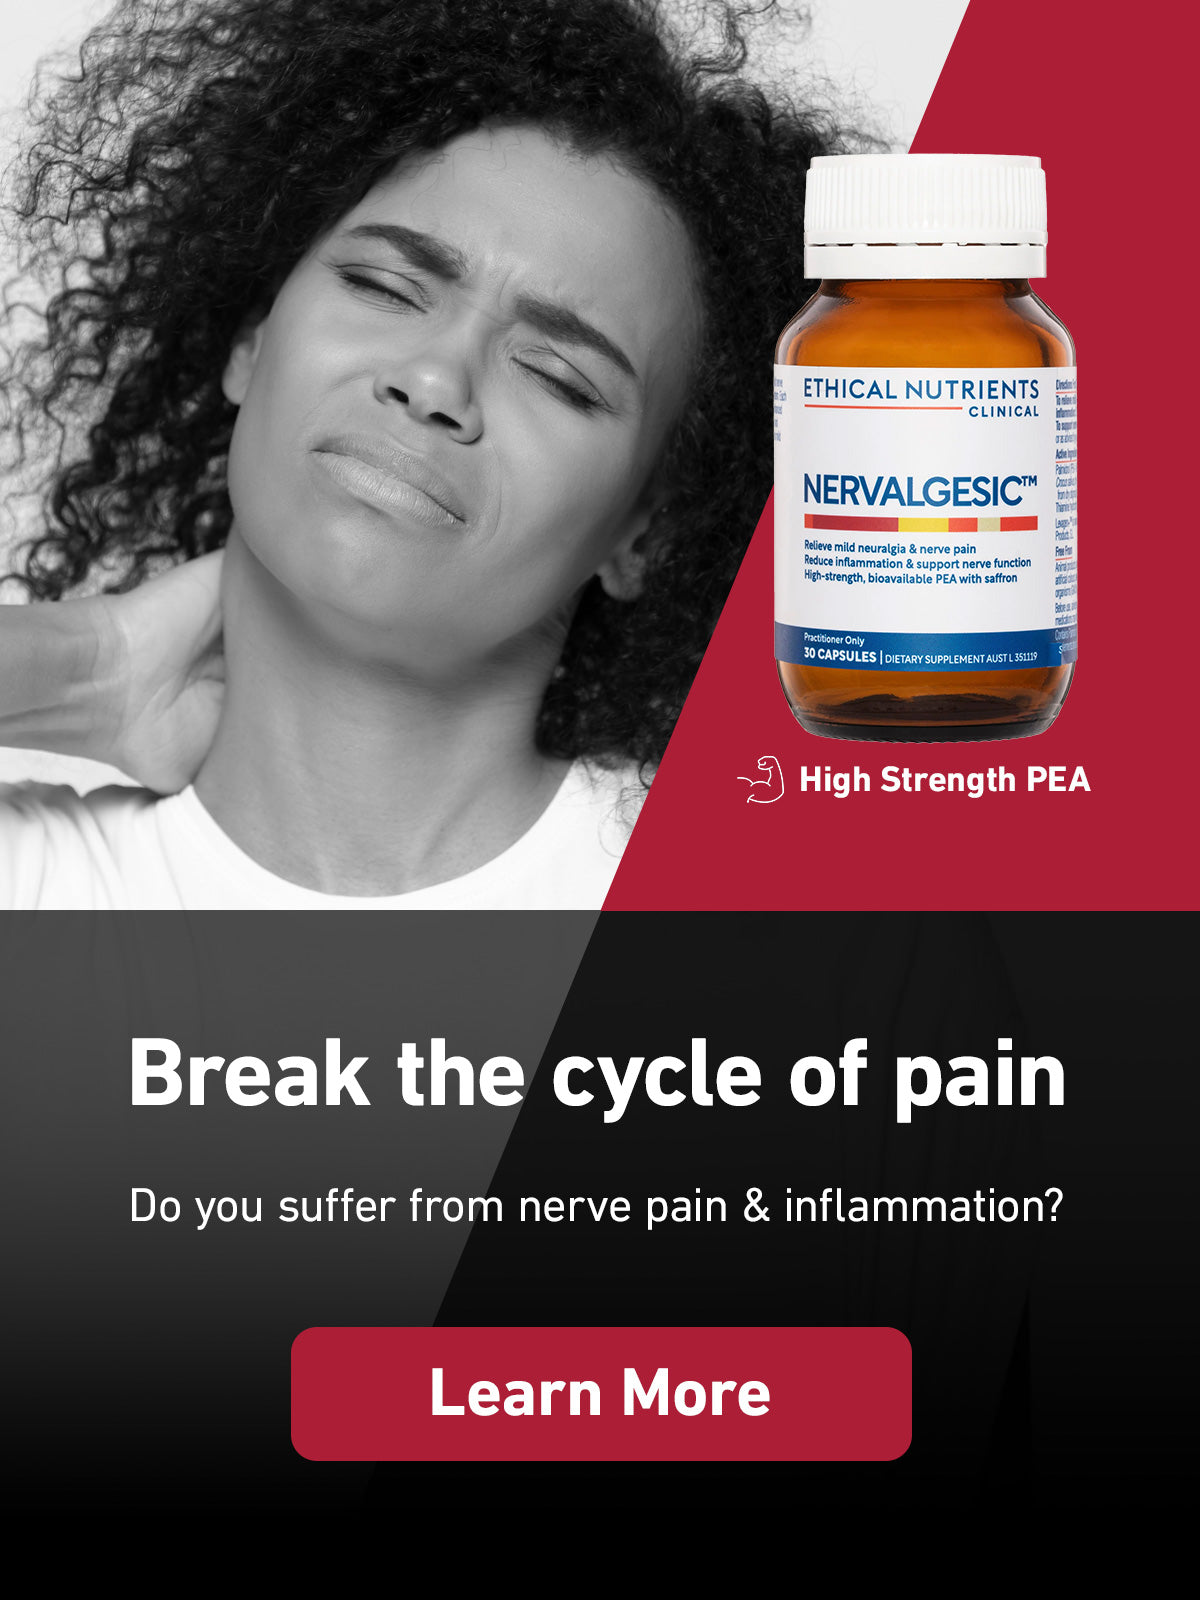 Break the cycle of pain. Do you suffer from nerve pain and inflammation? | Ethical Nutrients Clinical Nervalgesic | Learn more